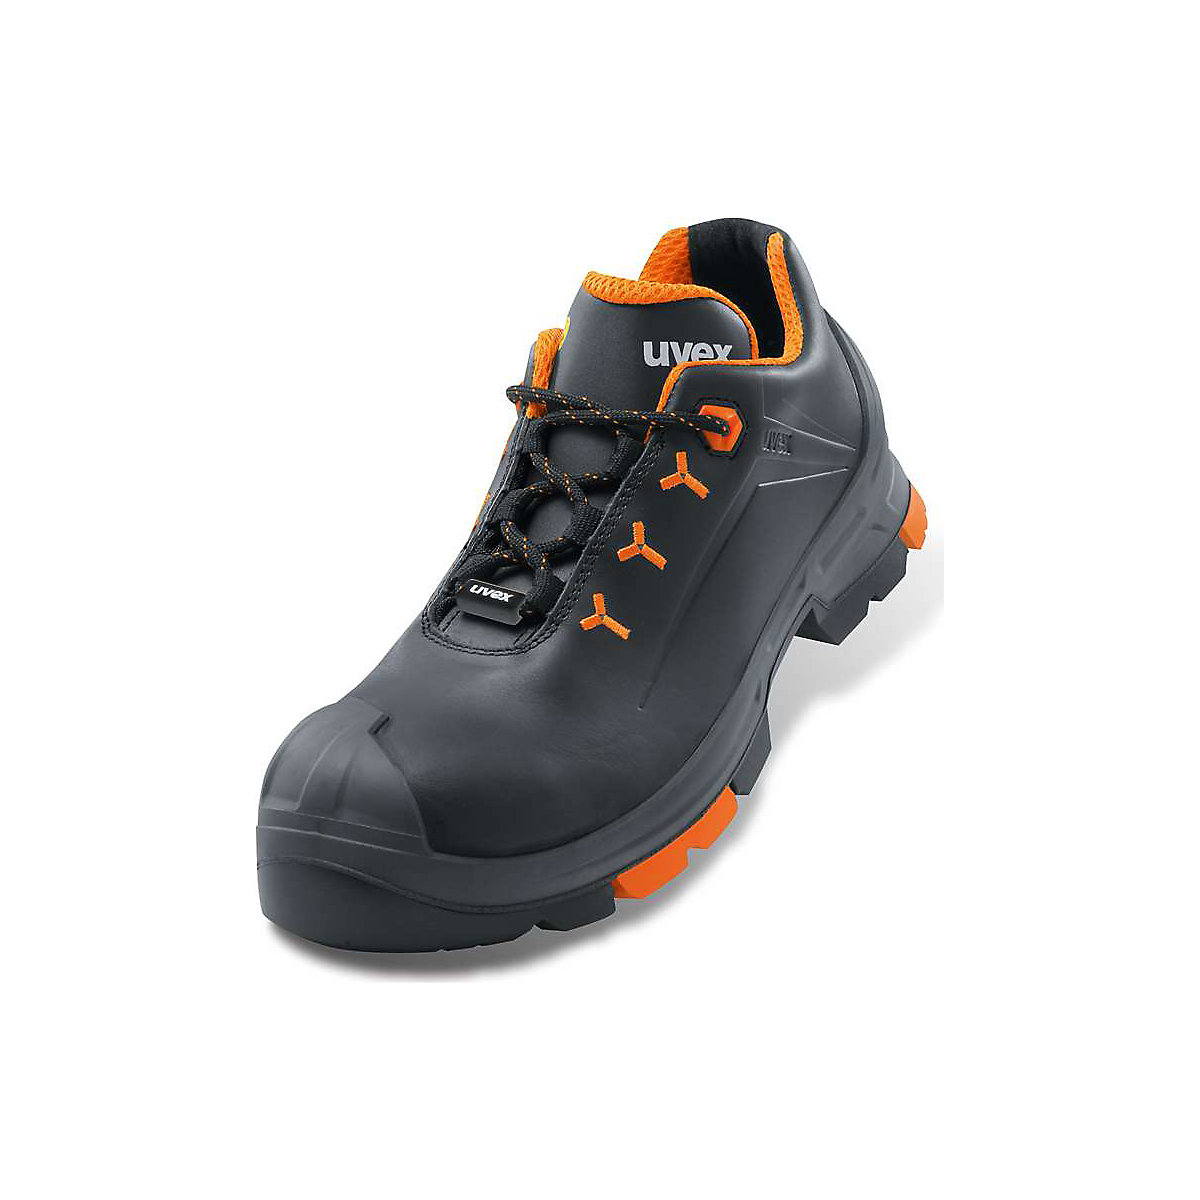 ESD S3 SRC safety lace-up shoe - Uvex